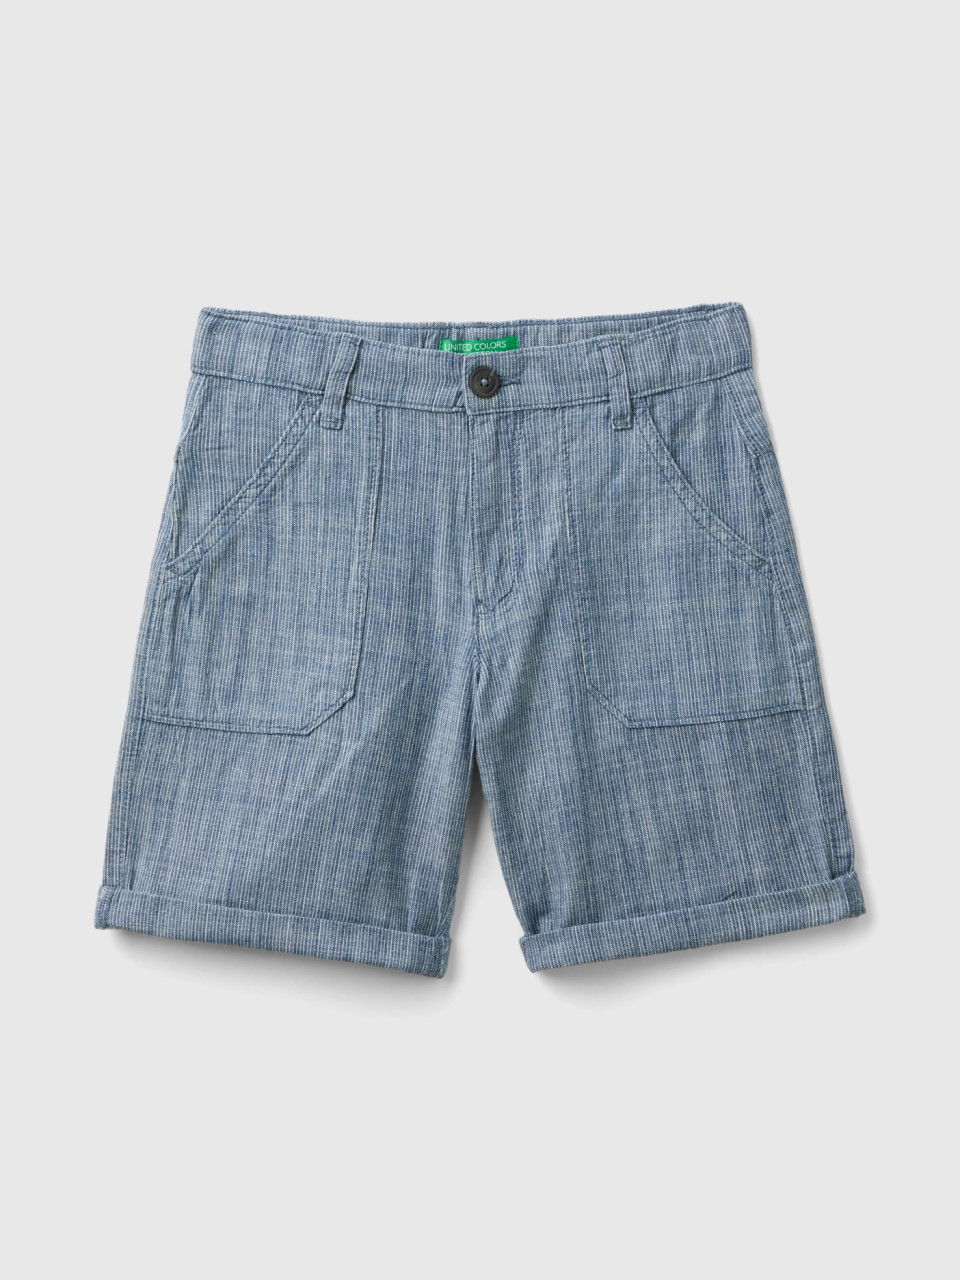 Benetton, Striped Shorts In Chambray, Blue, Kids